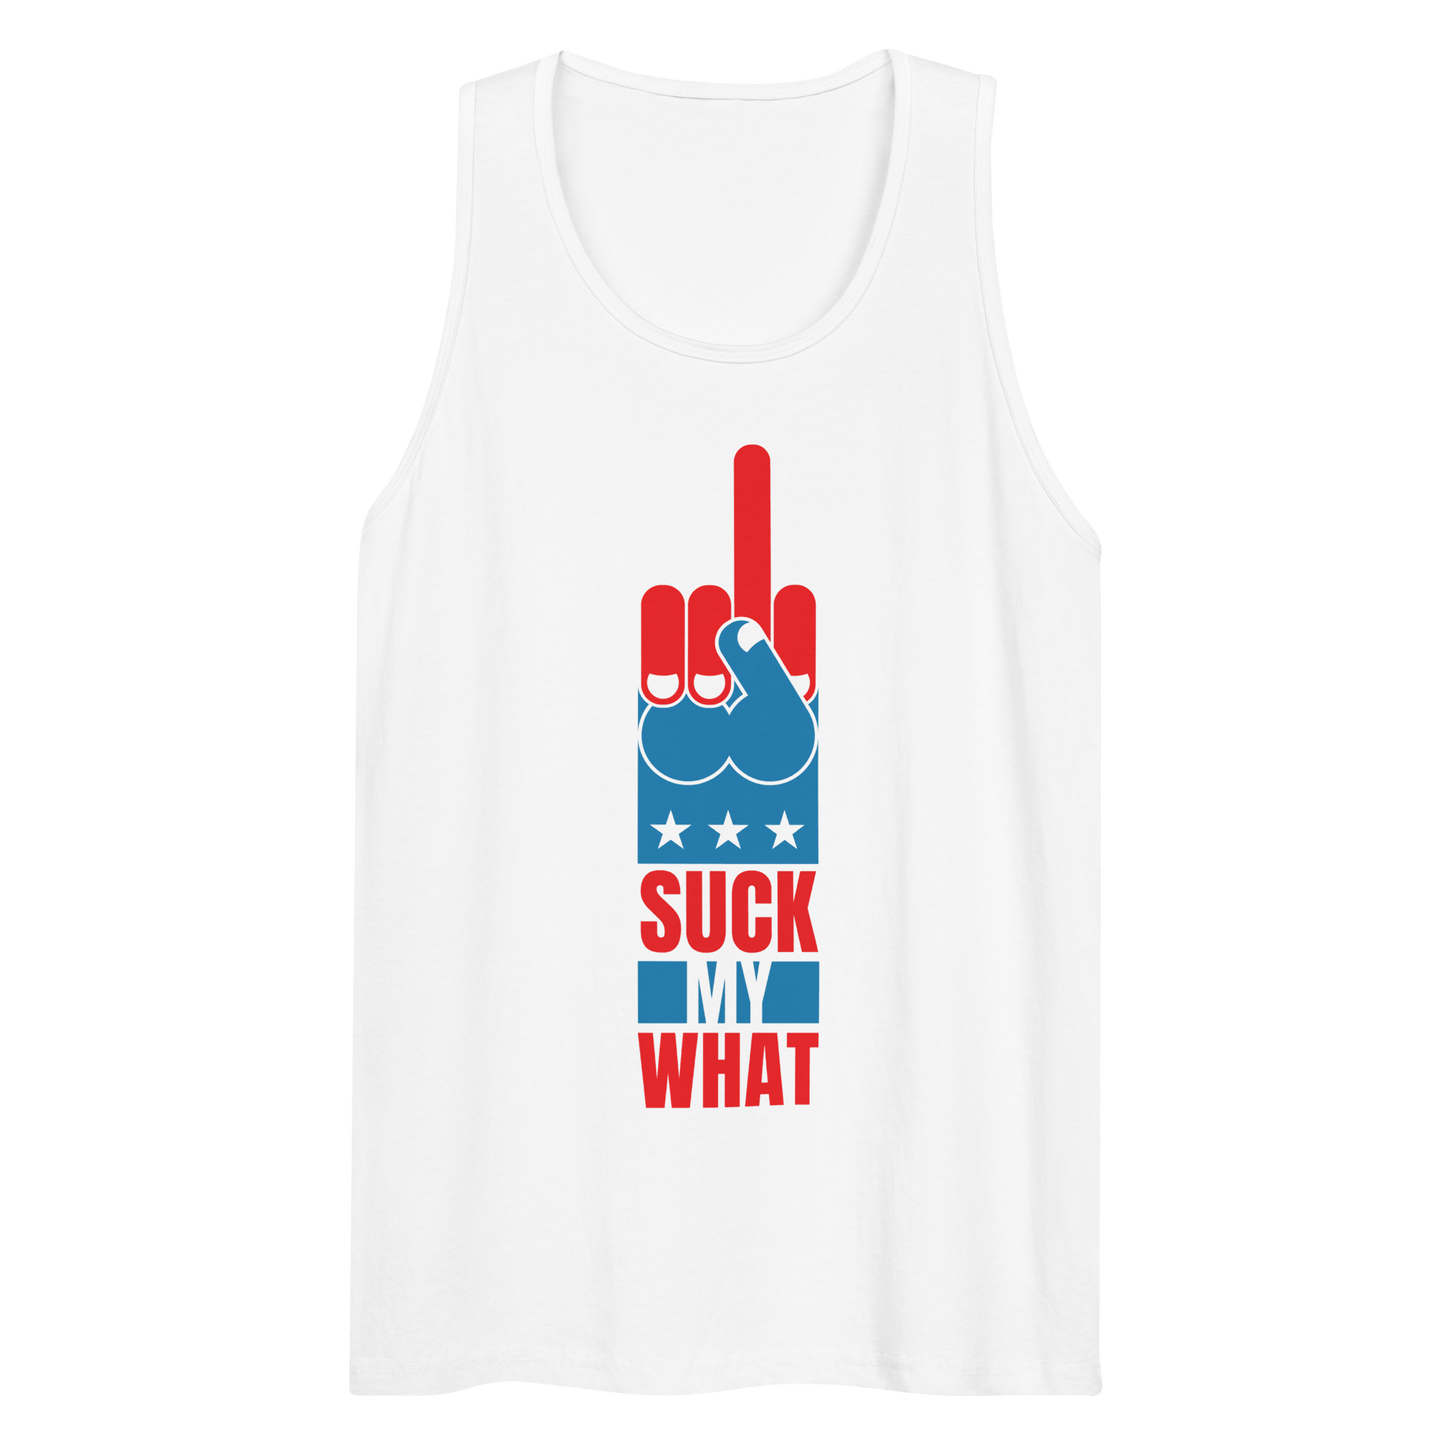 Patriot Missile Suck My What Premium White Tank Top - Independence Day, 4th of July, USA